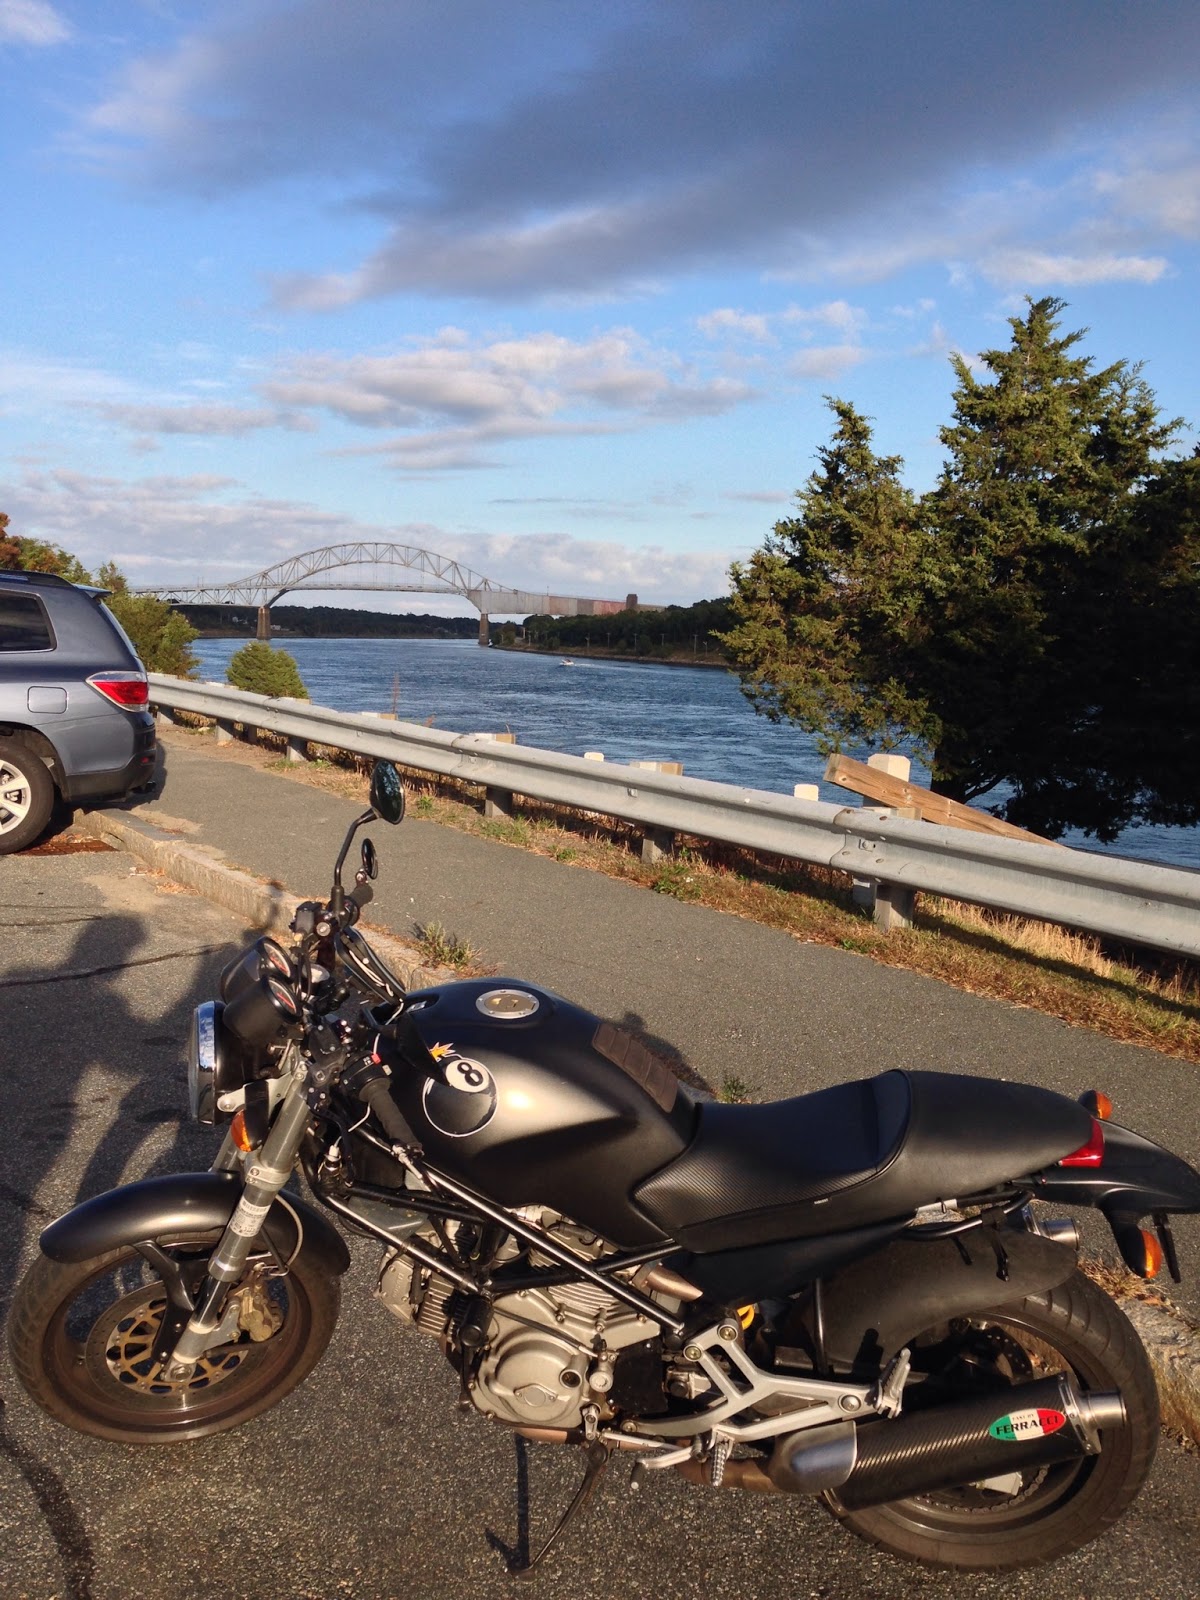 Tigho NYDucati goes Biking to Boston and Cape Cod and Chatham, Massachusetts Cape Cod Canal